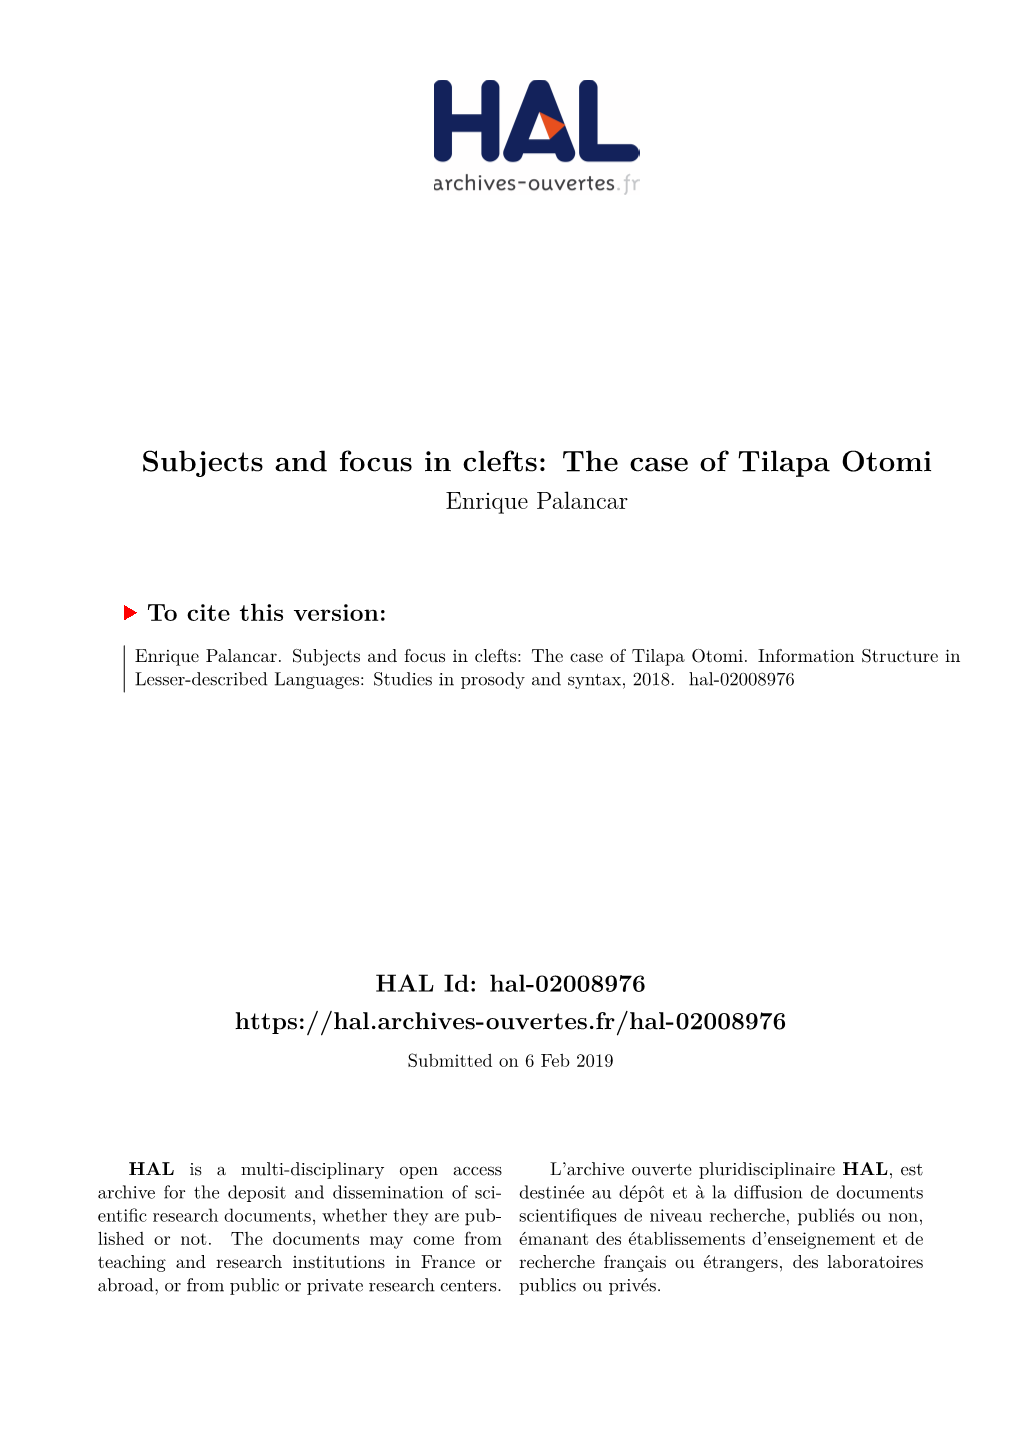 Subjects and Focus in Clefts: the Case of Tilapa Otomi Enrique Palancar